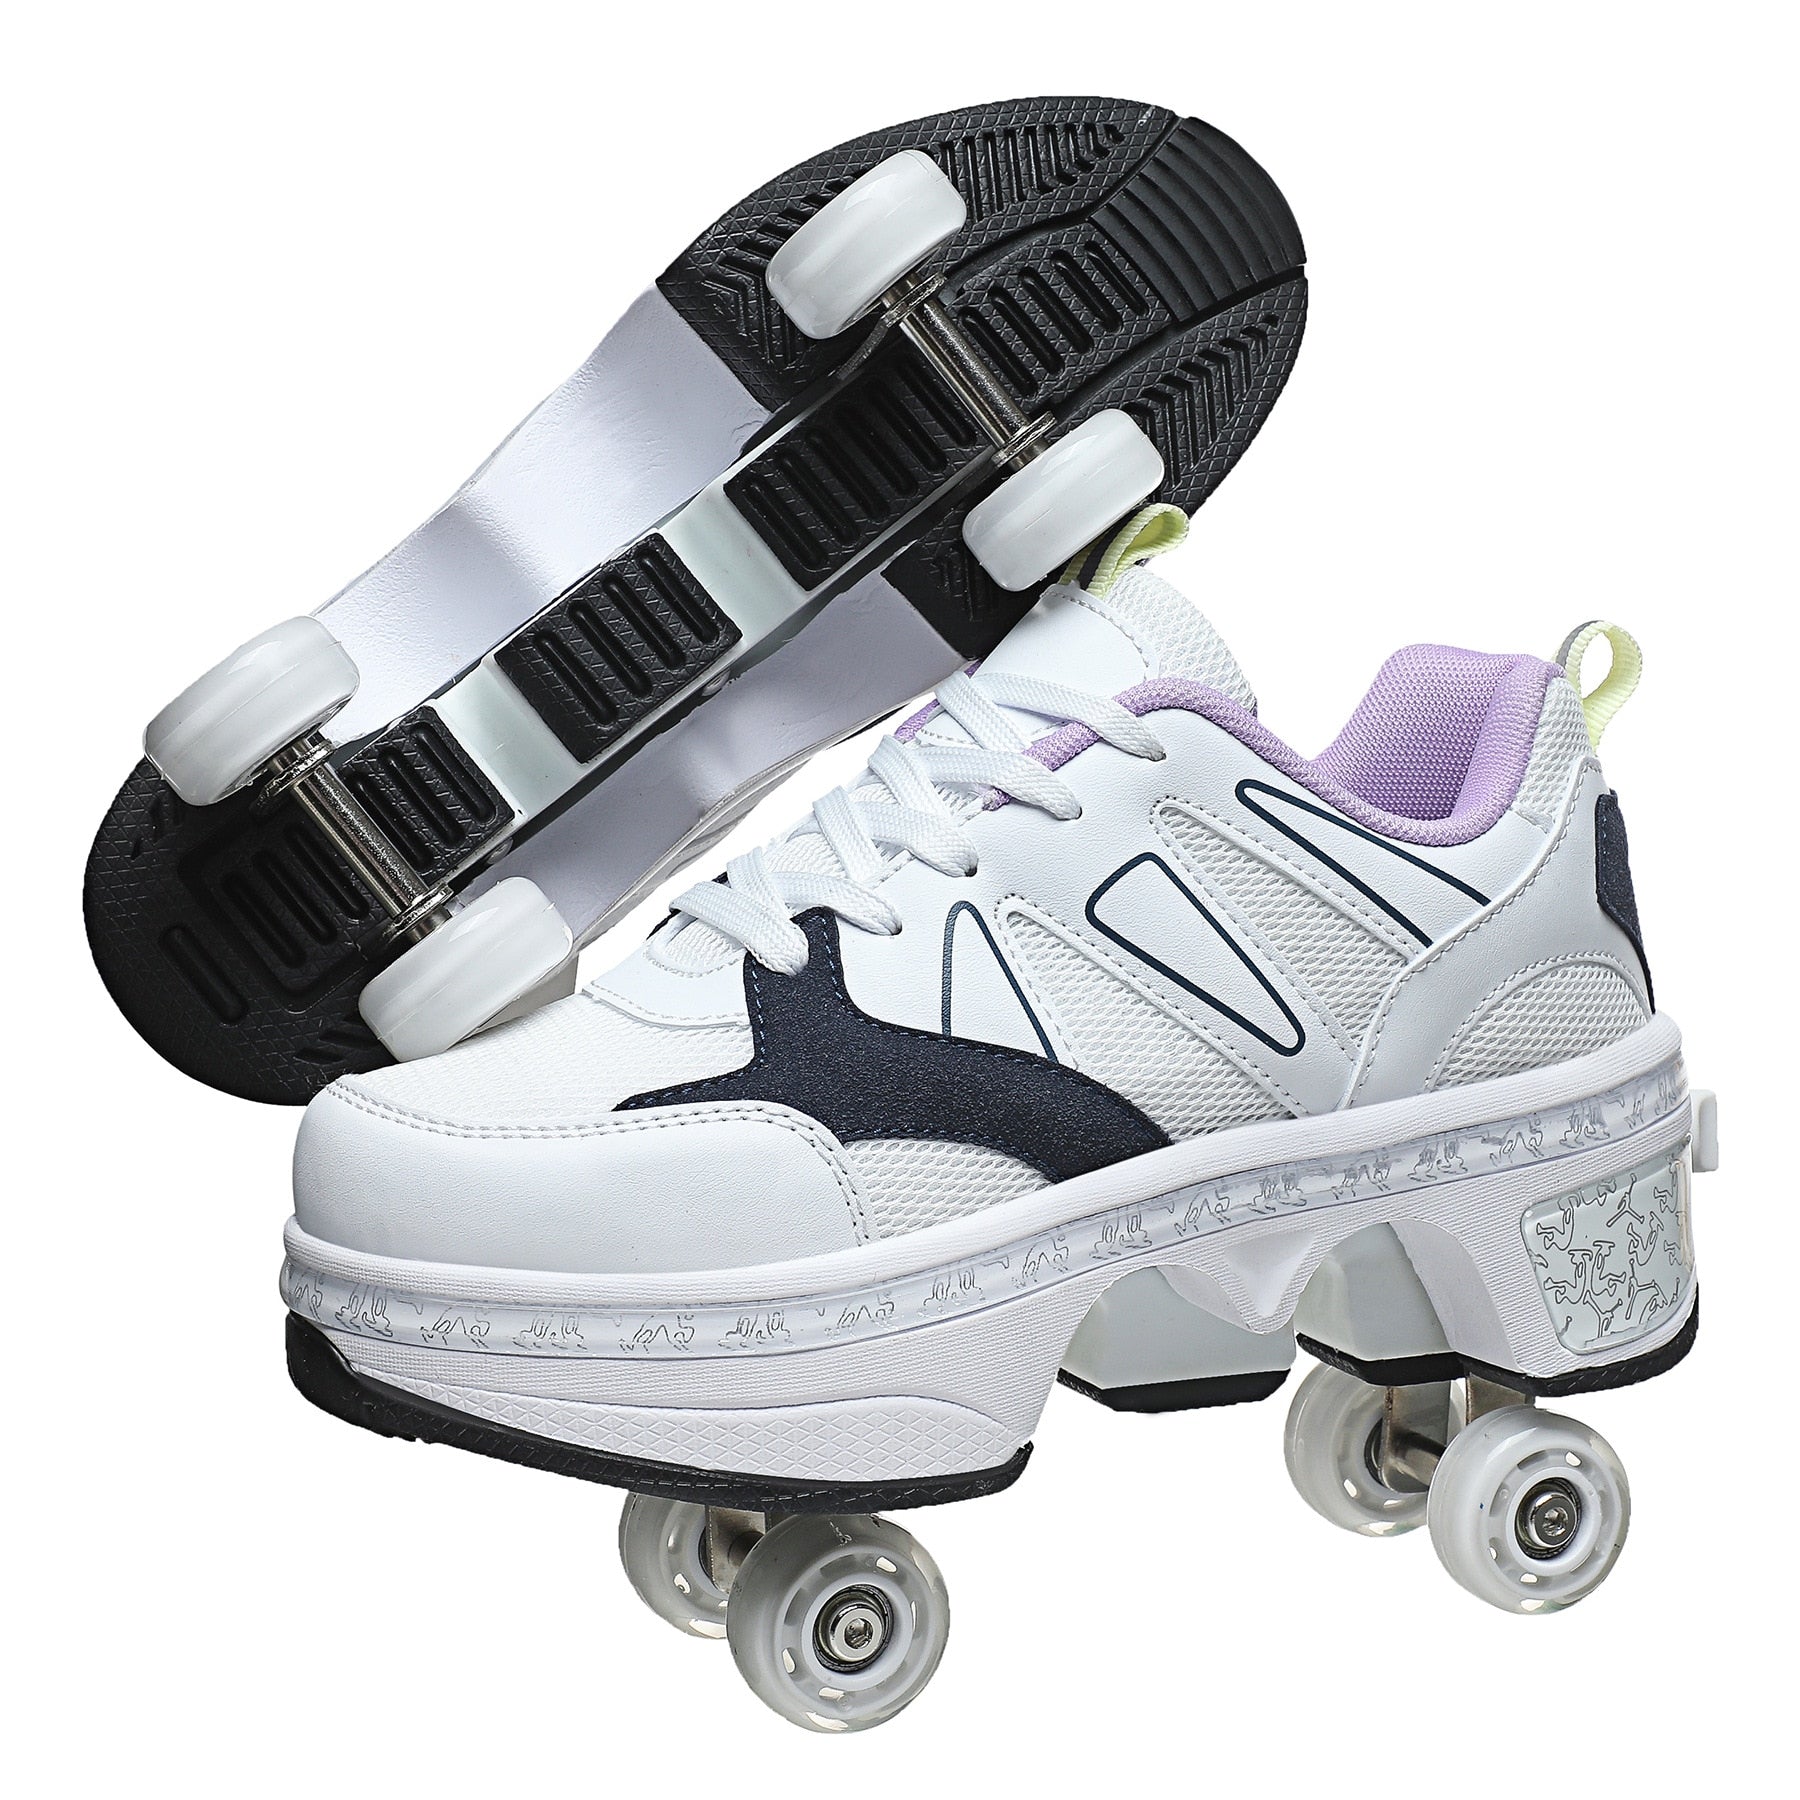 il rotolo 2 Dual-purpose Roller Skating Deformation Shoes